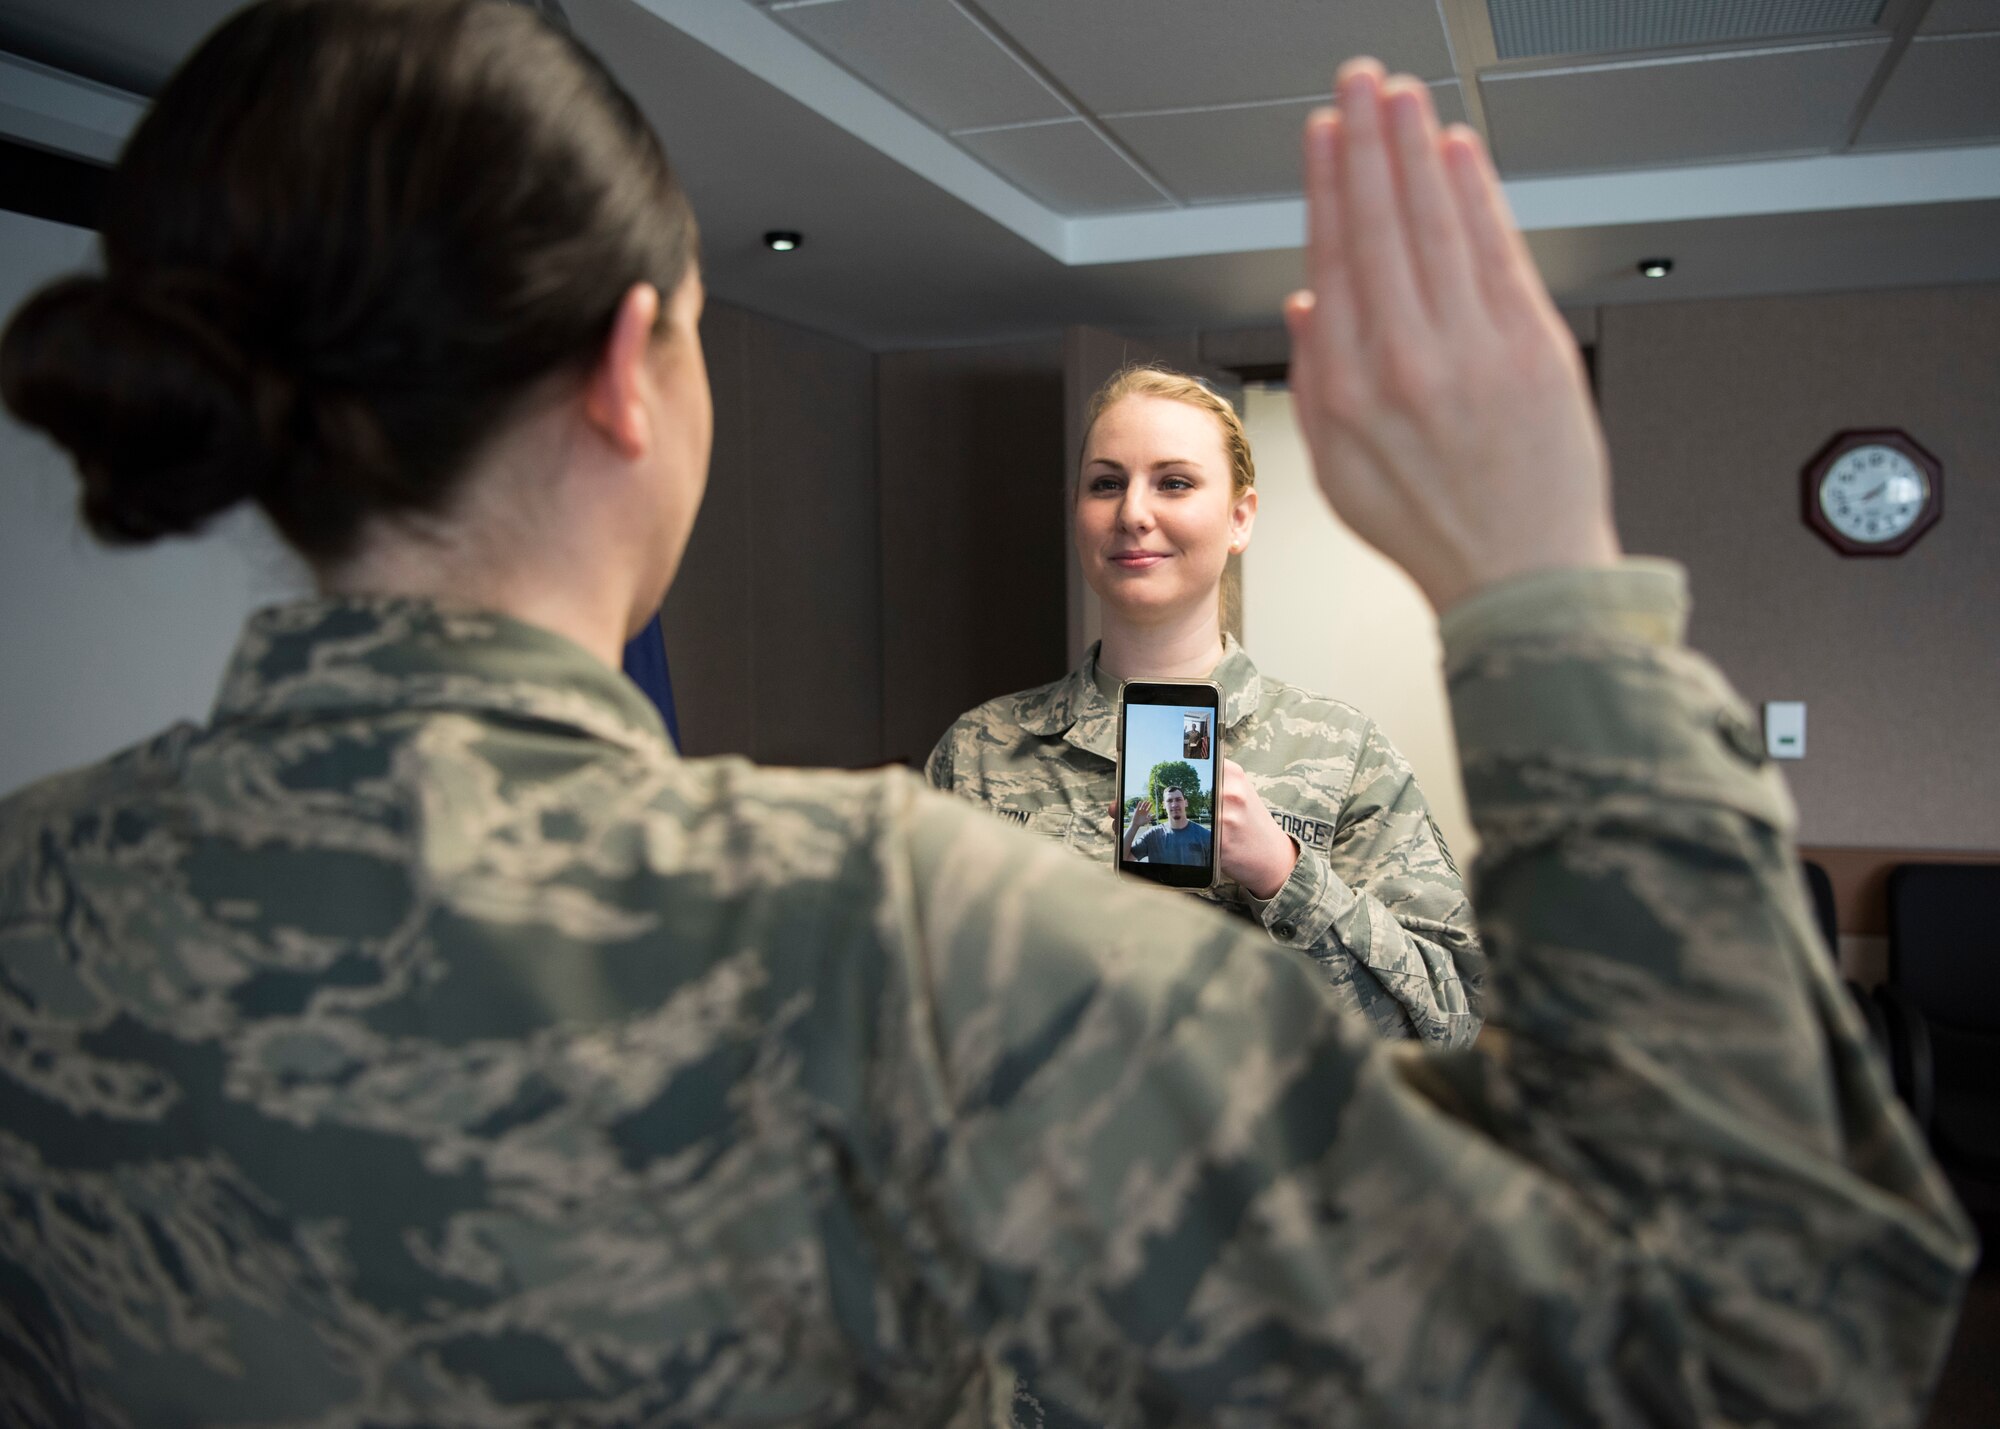 Staff Sgt. Elysia Wilson, 168th Wing production recruiter, helps enlist a new recruit using a video conference call April 16, 2020, at Eielson Air Force Base, Alaska. This virtual enlistment allowed a new Alaska Air National Guard recruit to complete their oath of enlistment while complying with COVID-19 safety regulations. (U.S. Air National Guard photo by Senior Airman Shannon Chace)